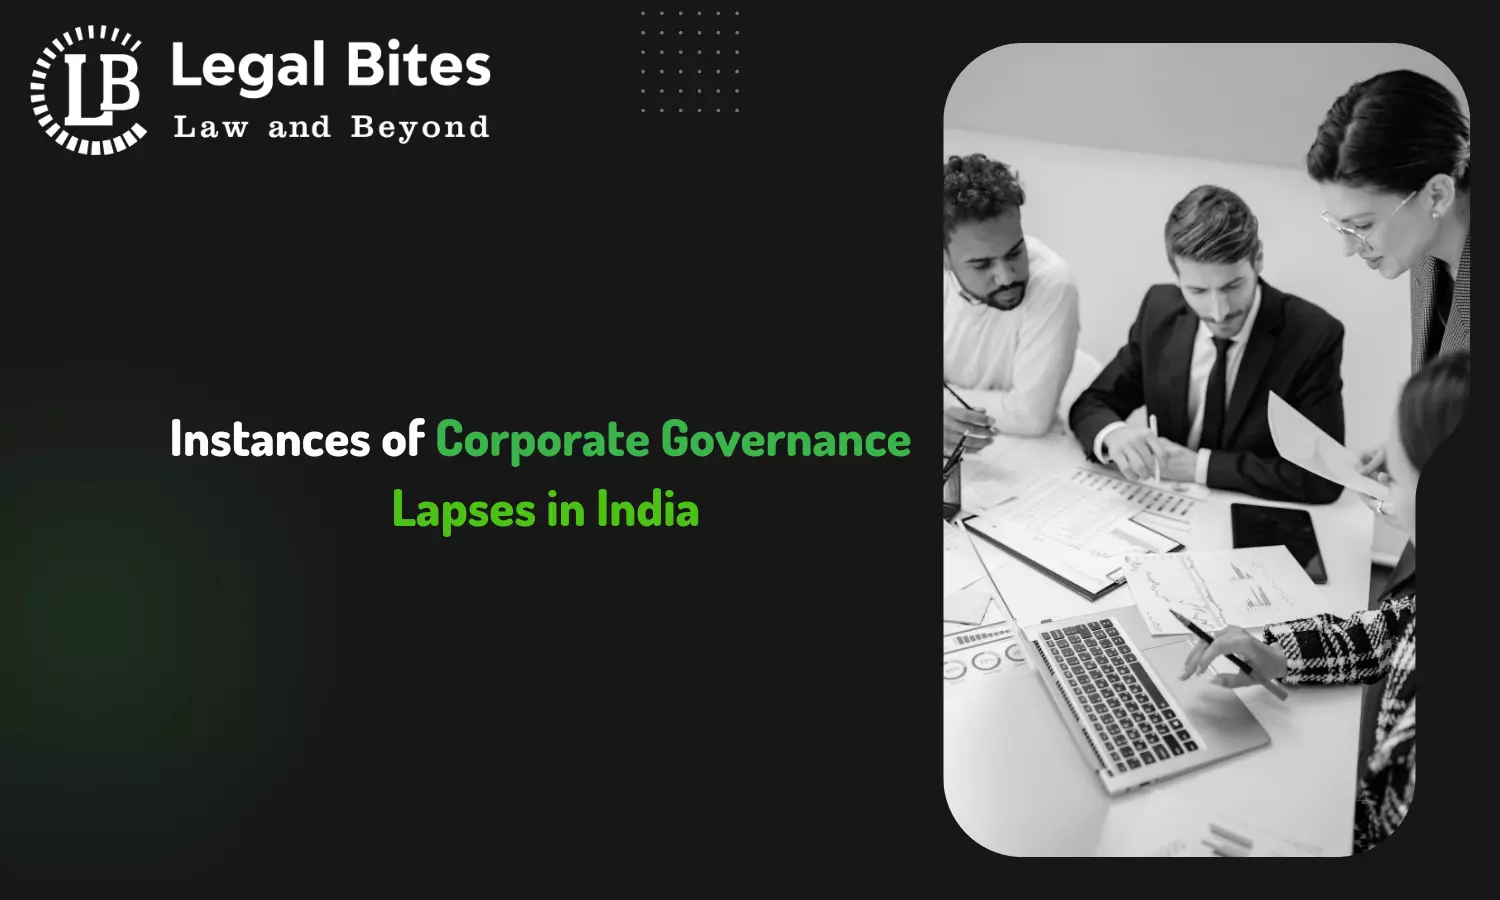 Instances of Corporate Governance Lapses in India